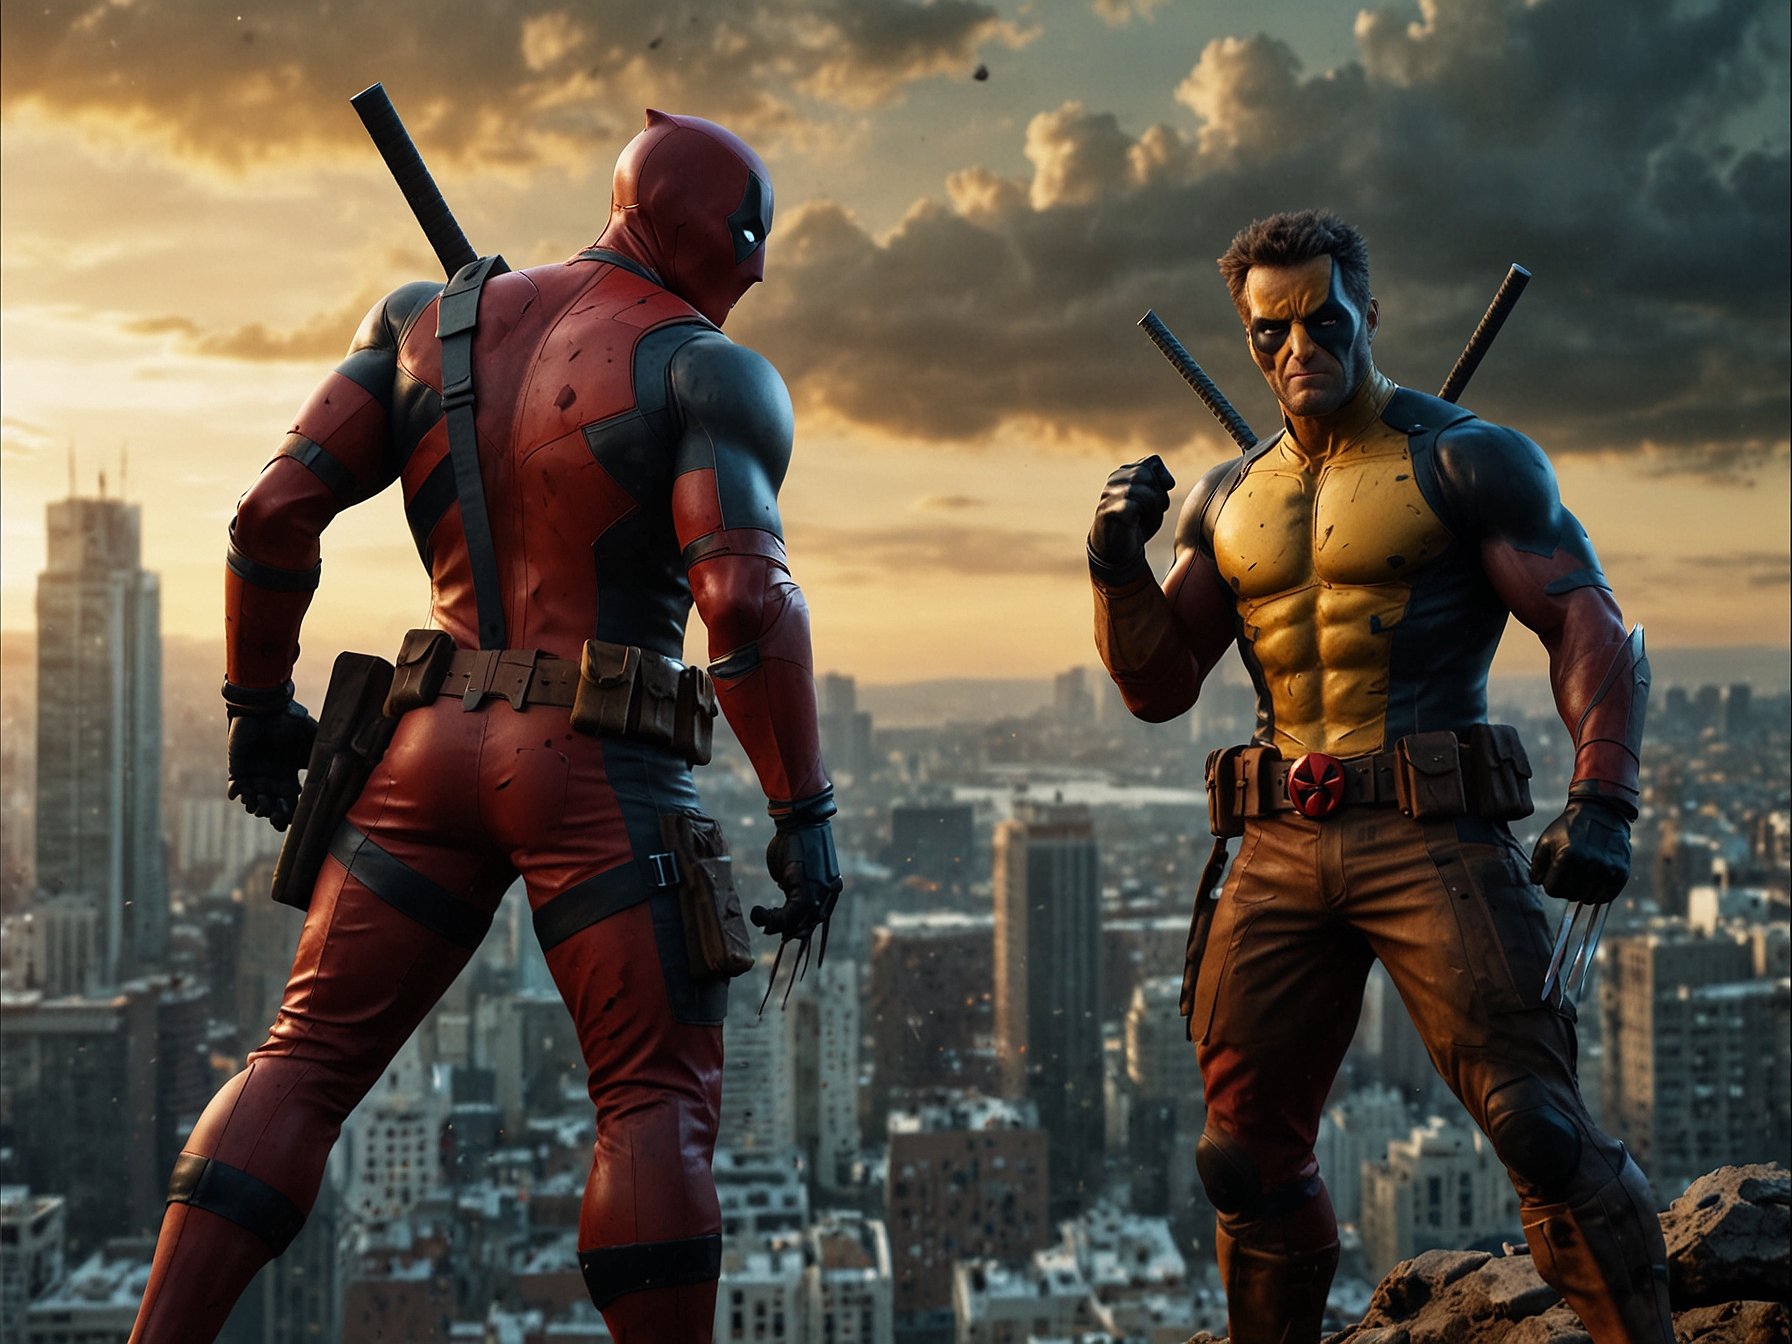 Deadpool and Wolverine striking dynamic poses against a dramatic backdrop, illustrating the film's action-packed scenes and character camaraderie. The backdrop features a blend of urban chaos and serene landscapes.